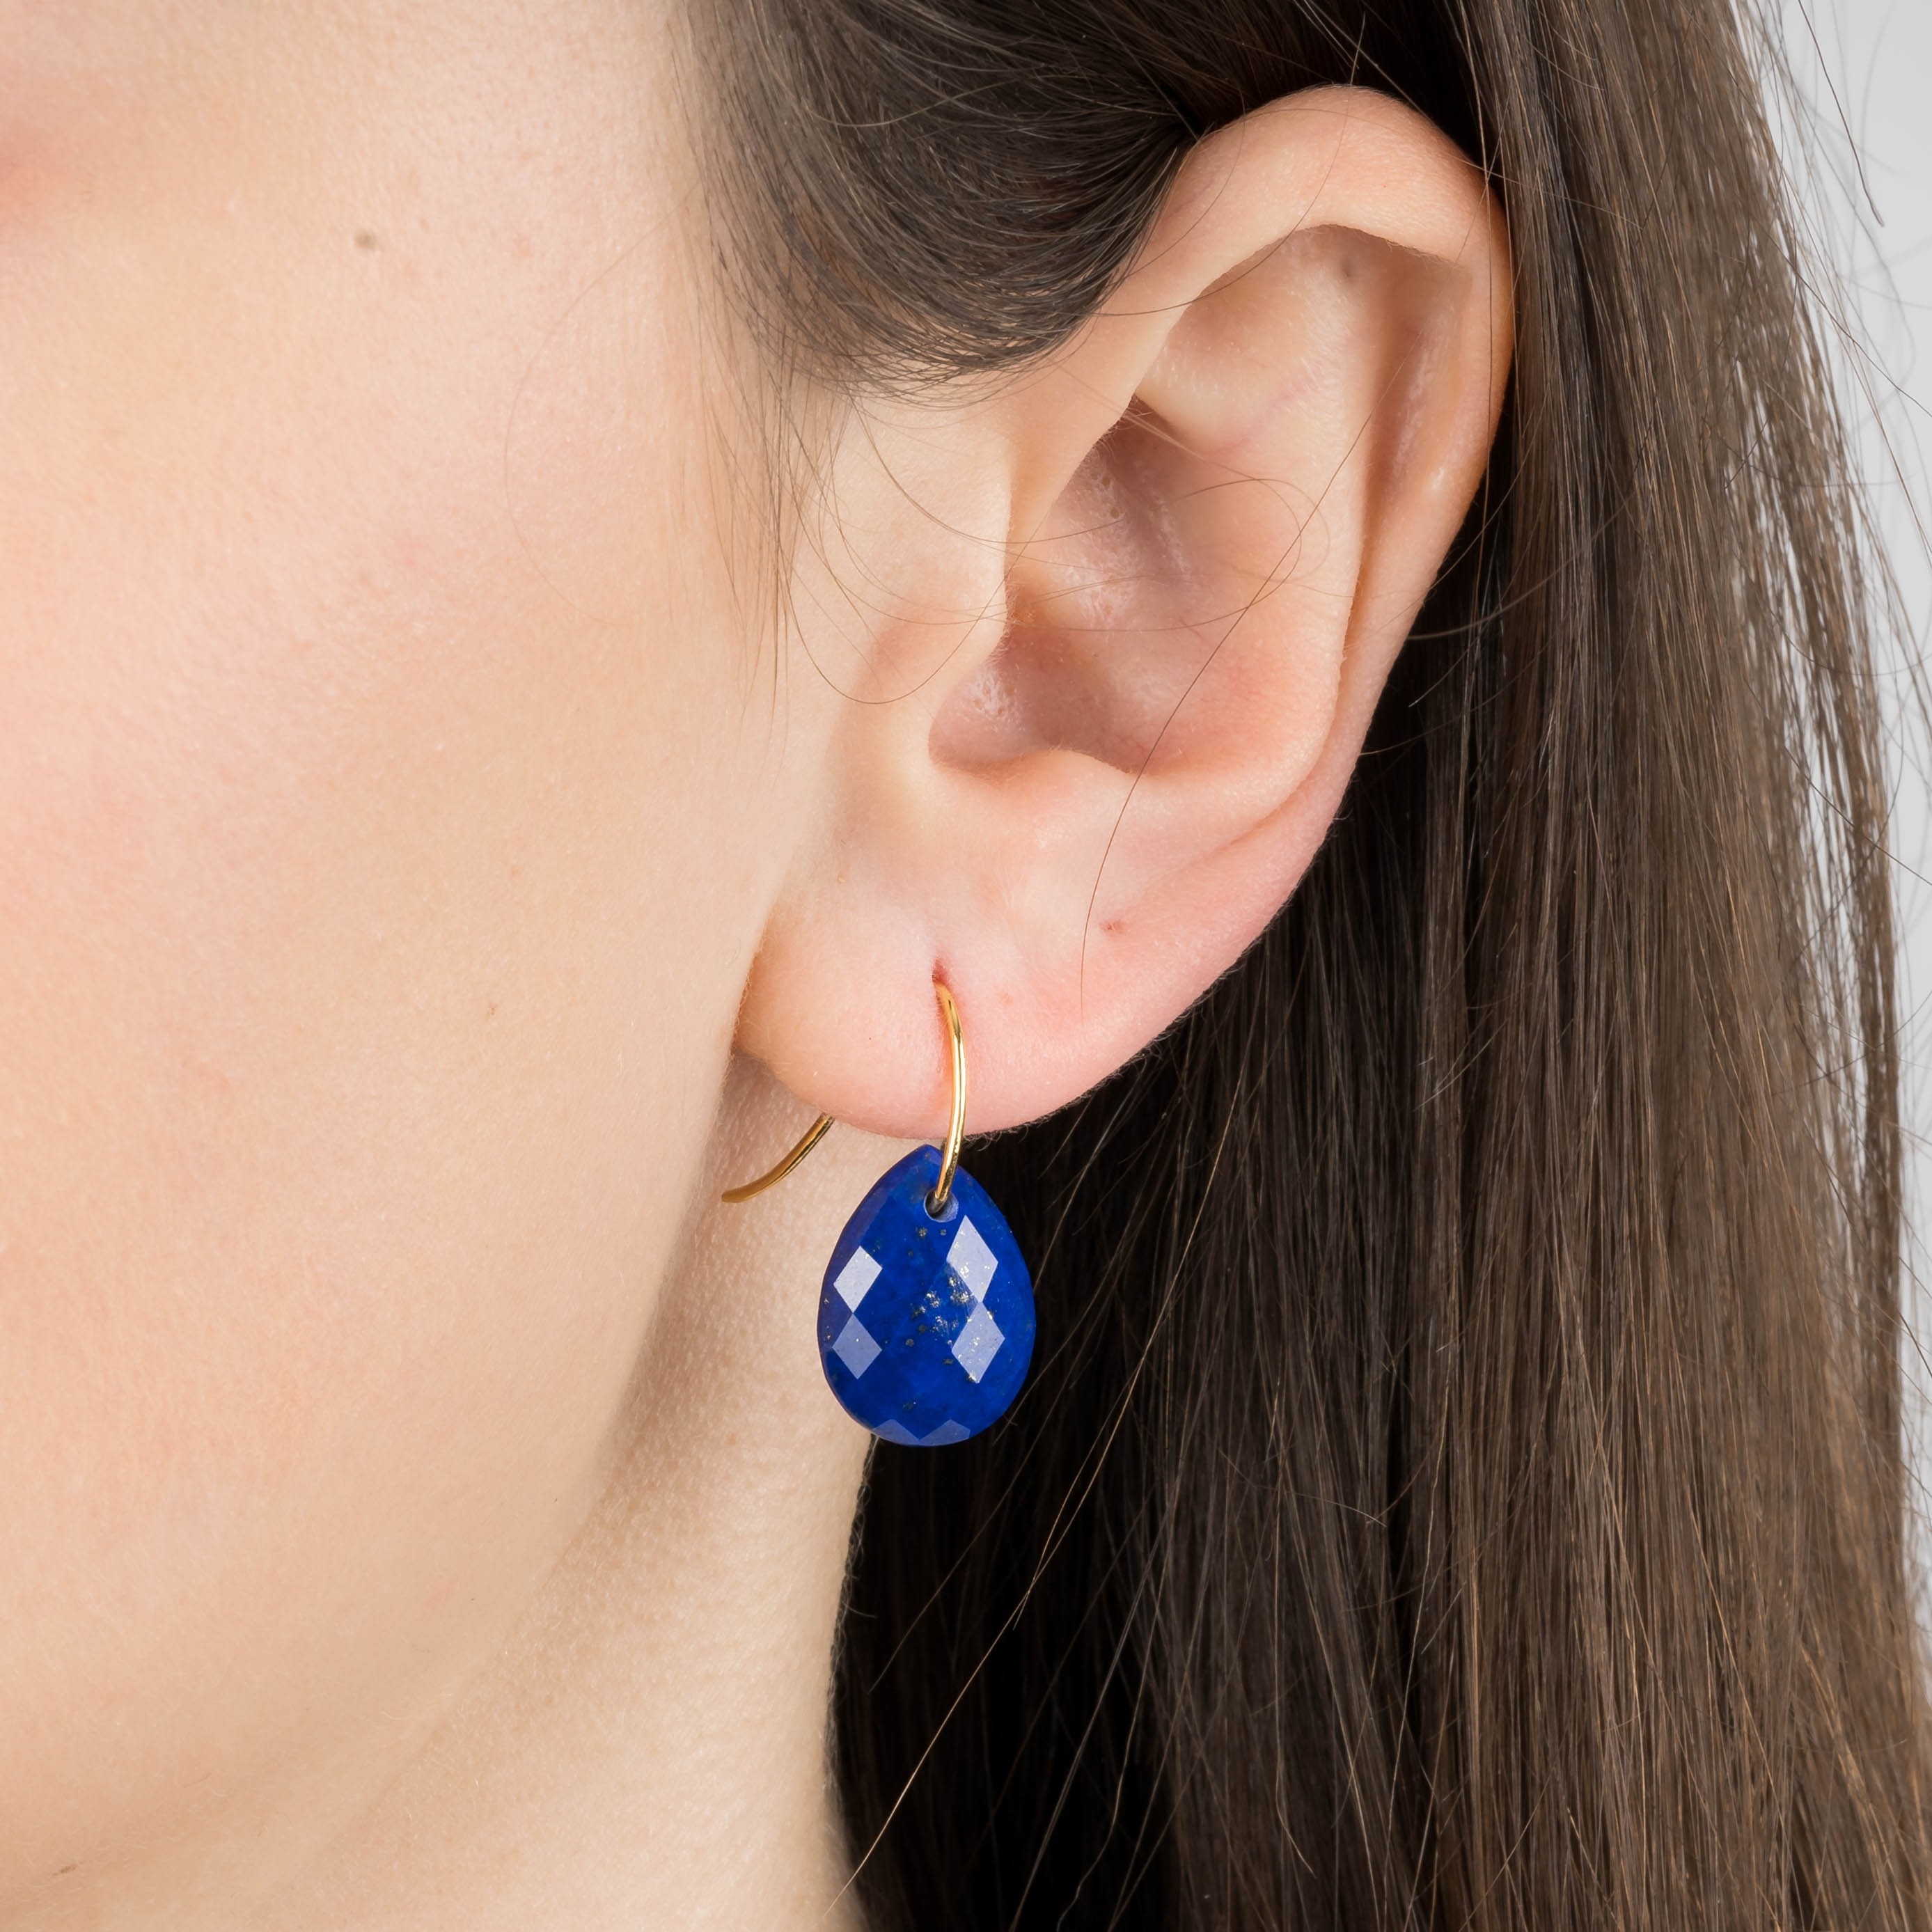 14k Gold Trinity Knot Earrings with Sapphire